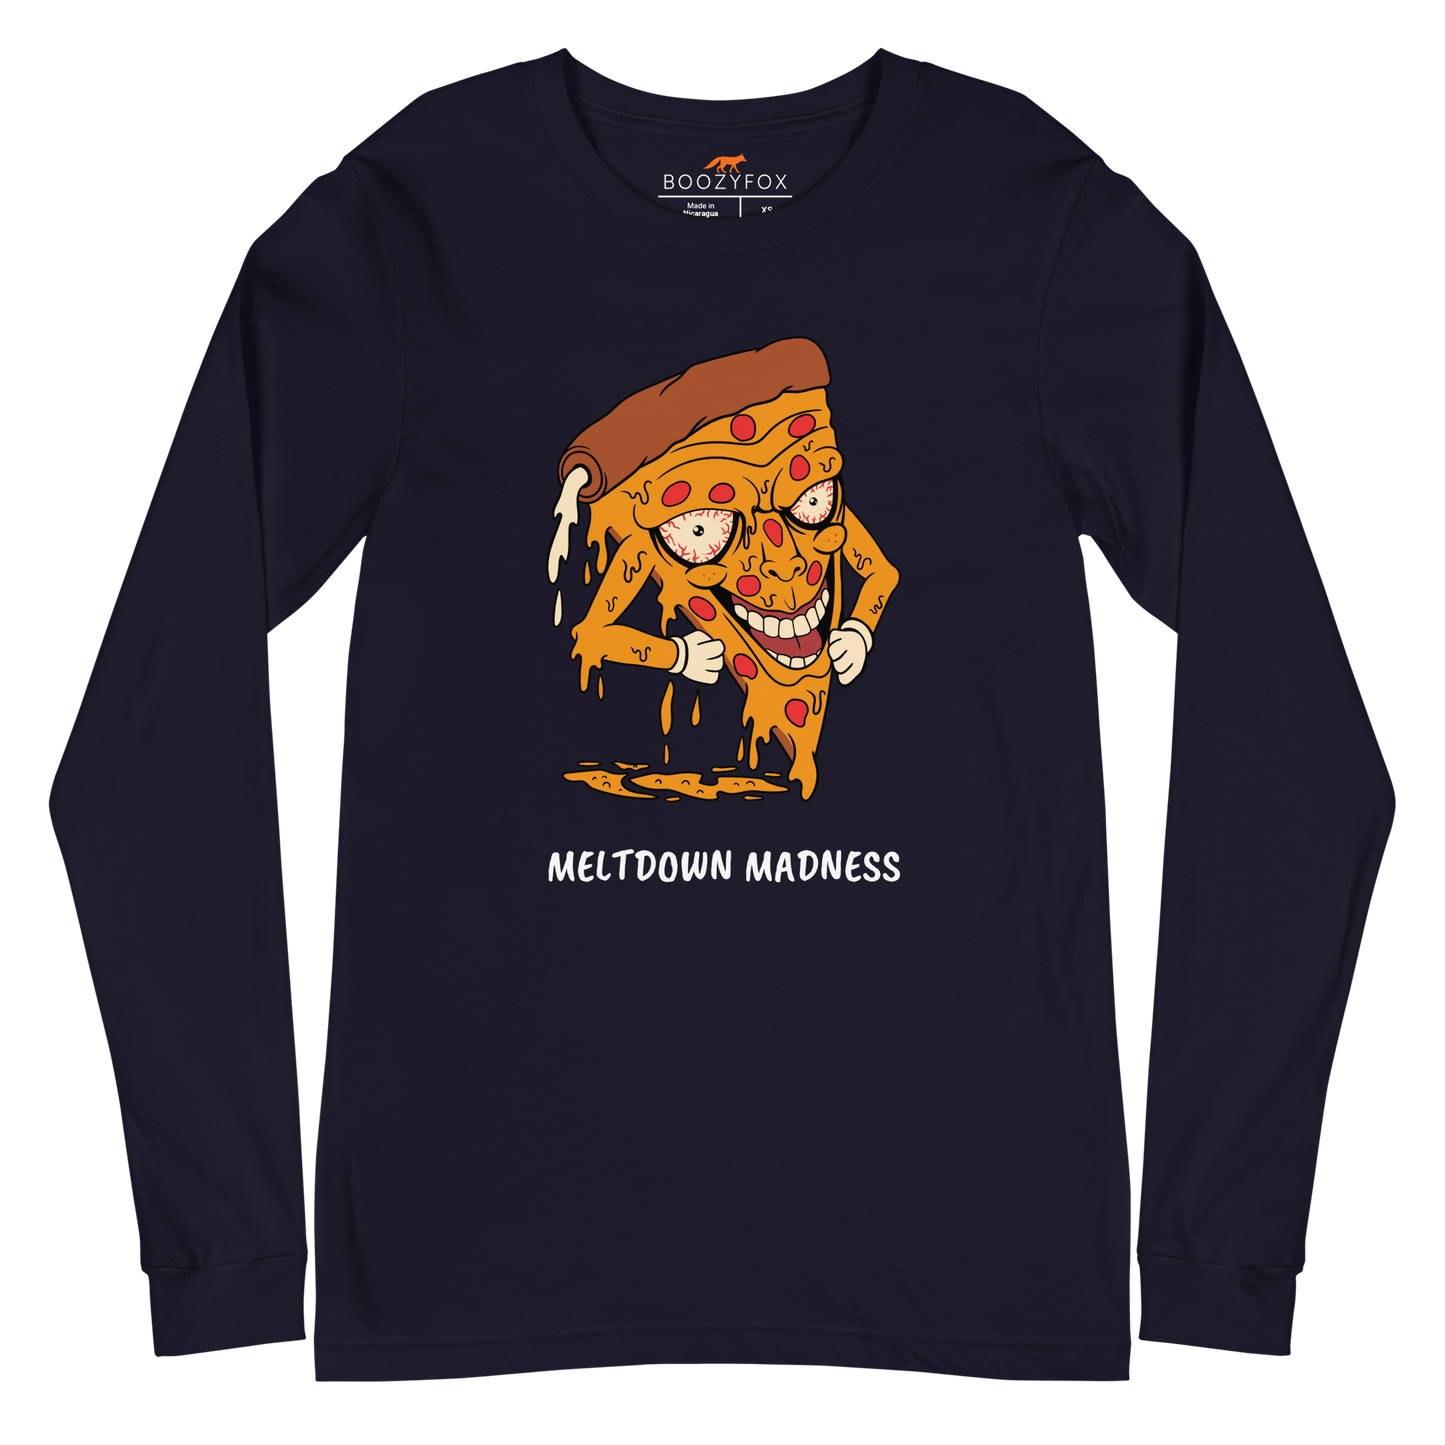 Navy Melting Pizza Long Sleeve Tee featuring a Meltdown Madness graphic on the chest - Funny Pizza Long Sleeve Graphic Tees - Boozy Fox